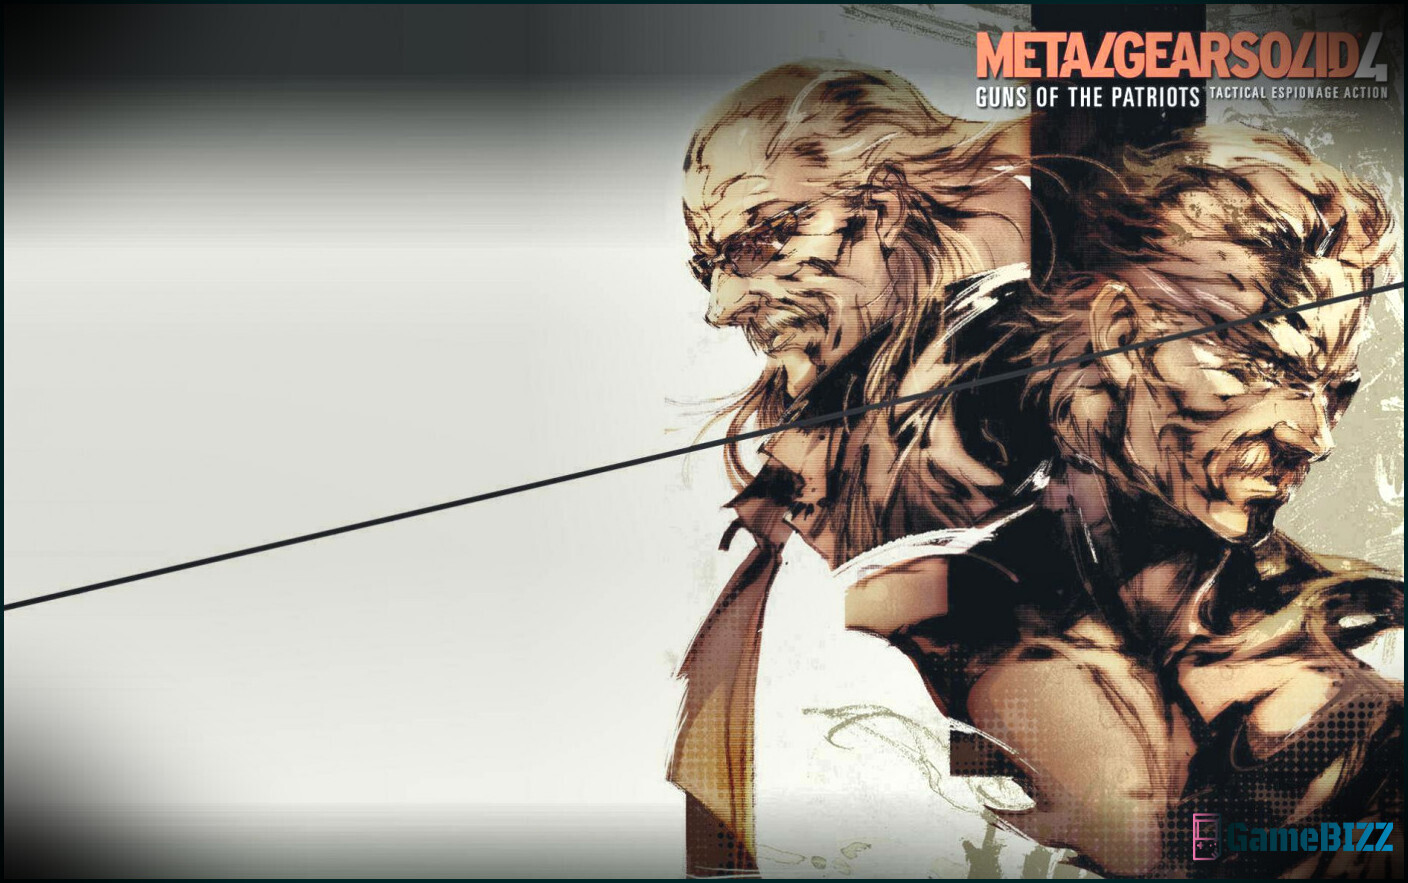 Metal Gear Solid 4 And Peace Walker Are Included In Master Collection's Files